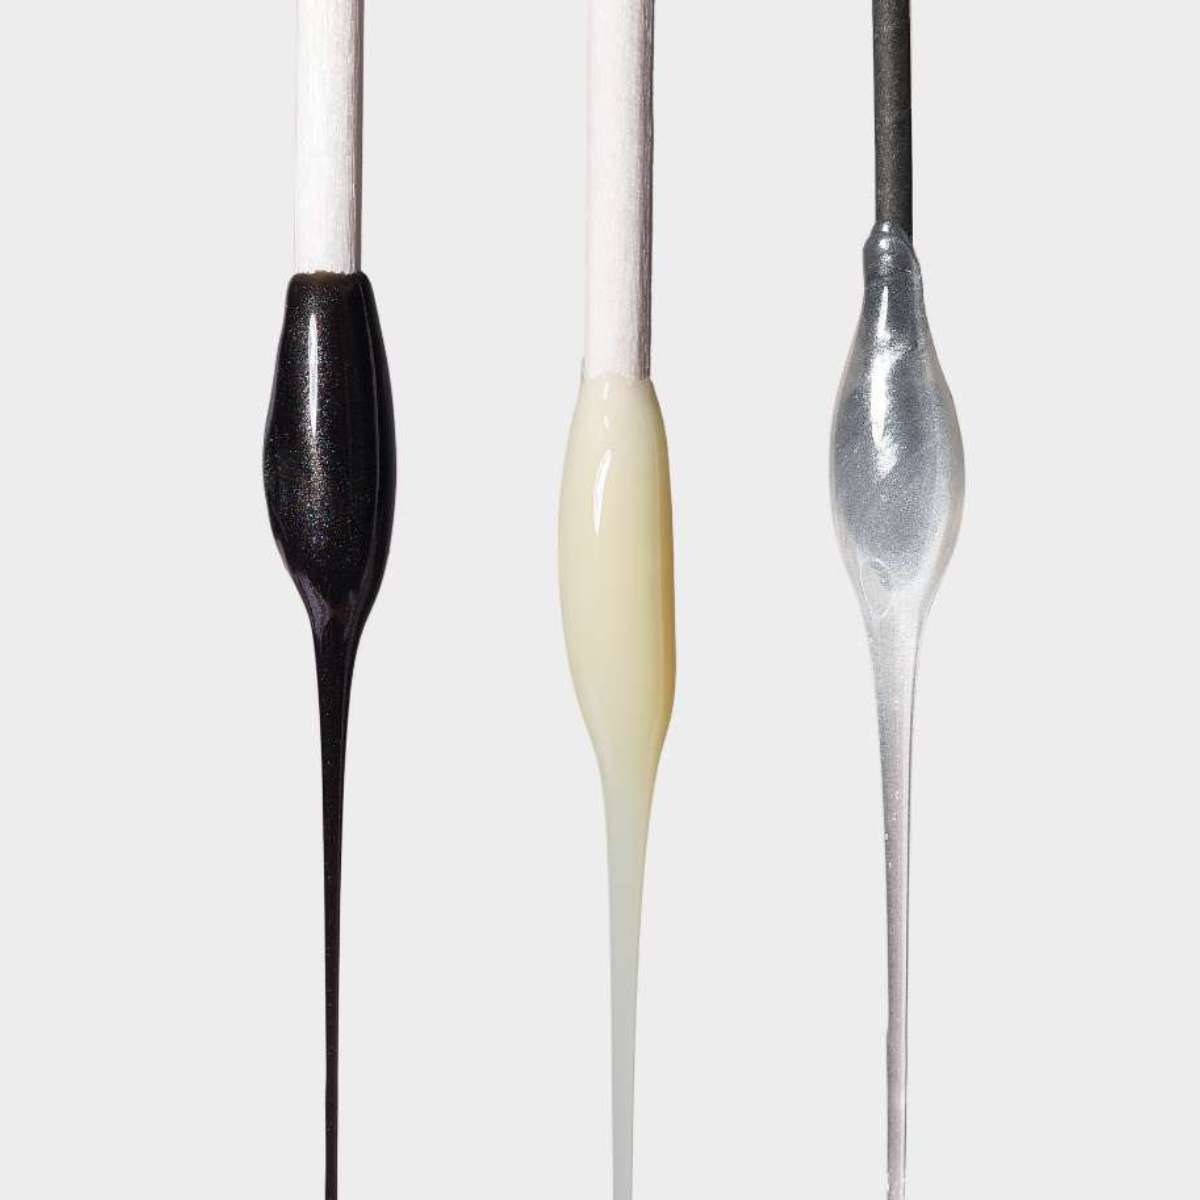 Three types of wax dripping from applicator